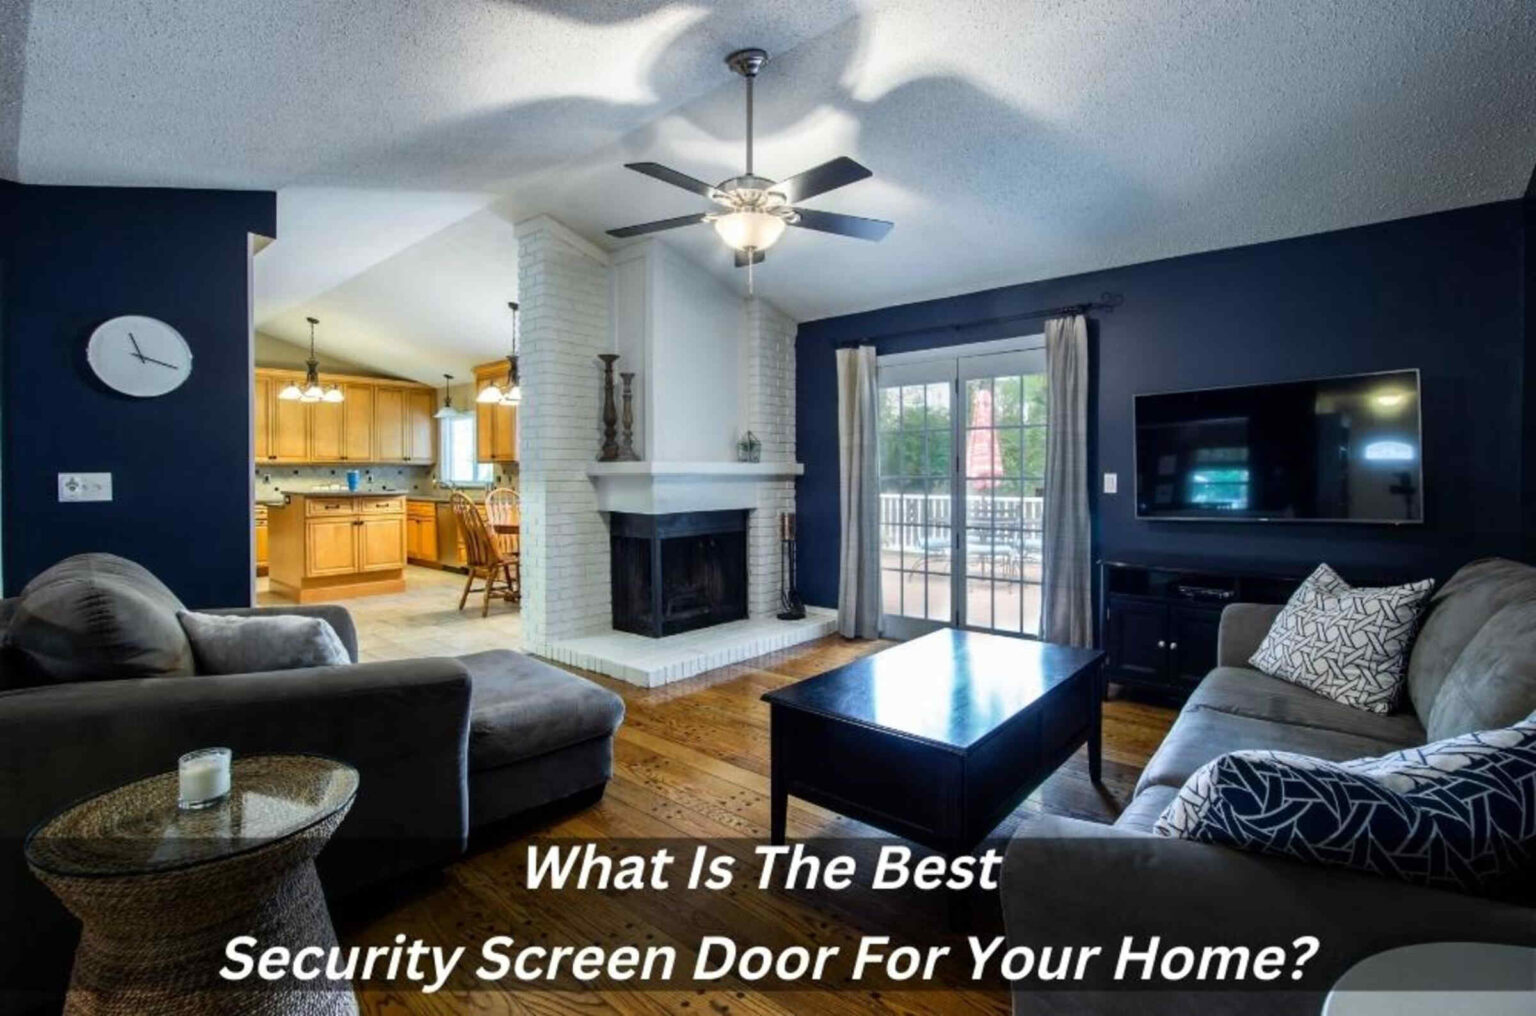 Are you looking to add a little pizazz to your front door? Here are the steps to finding the best security screen door for your home!